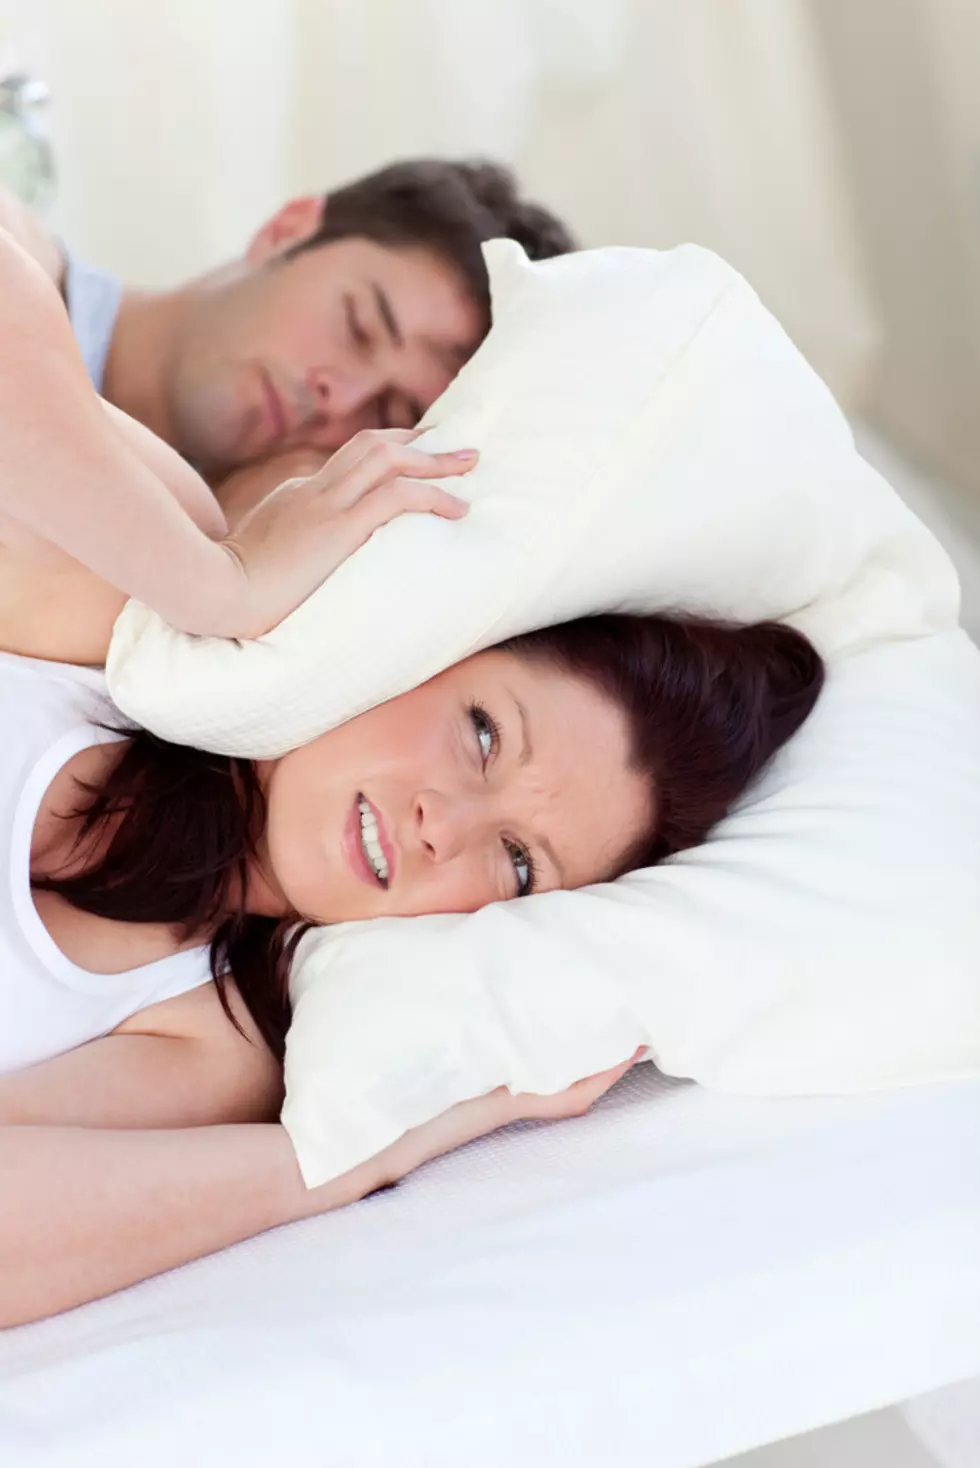 Your Snoring Partner Is Taking Years Off Your Life